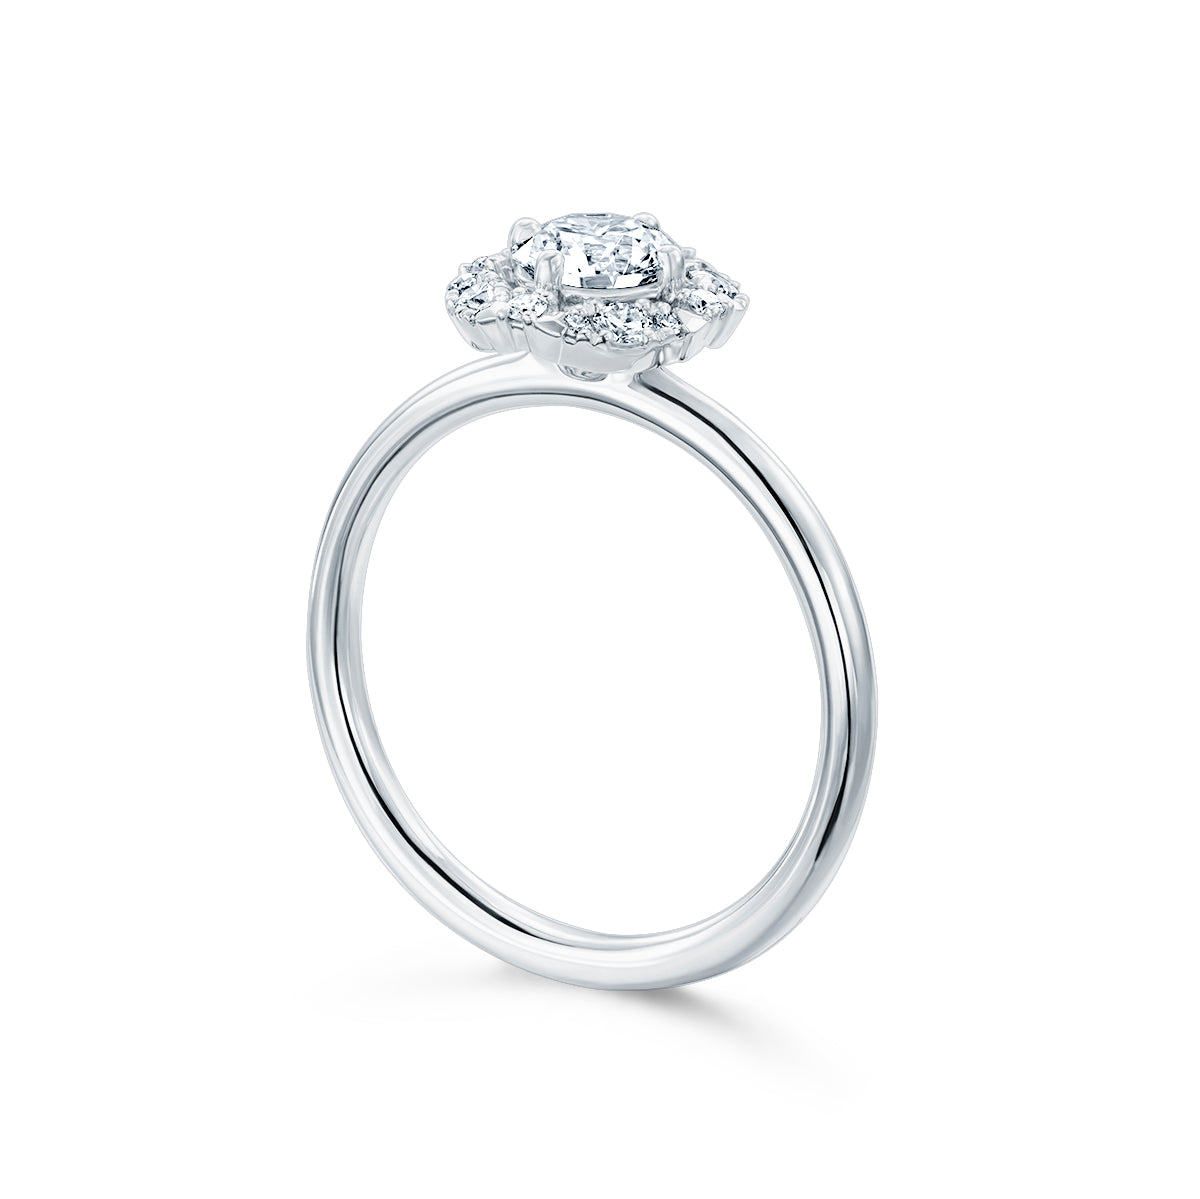 AERIAL MARQUISE HALO DIAMOND ENGAGEMENT RING